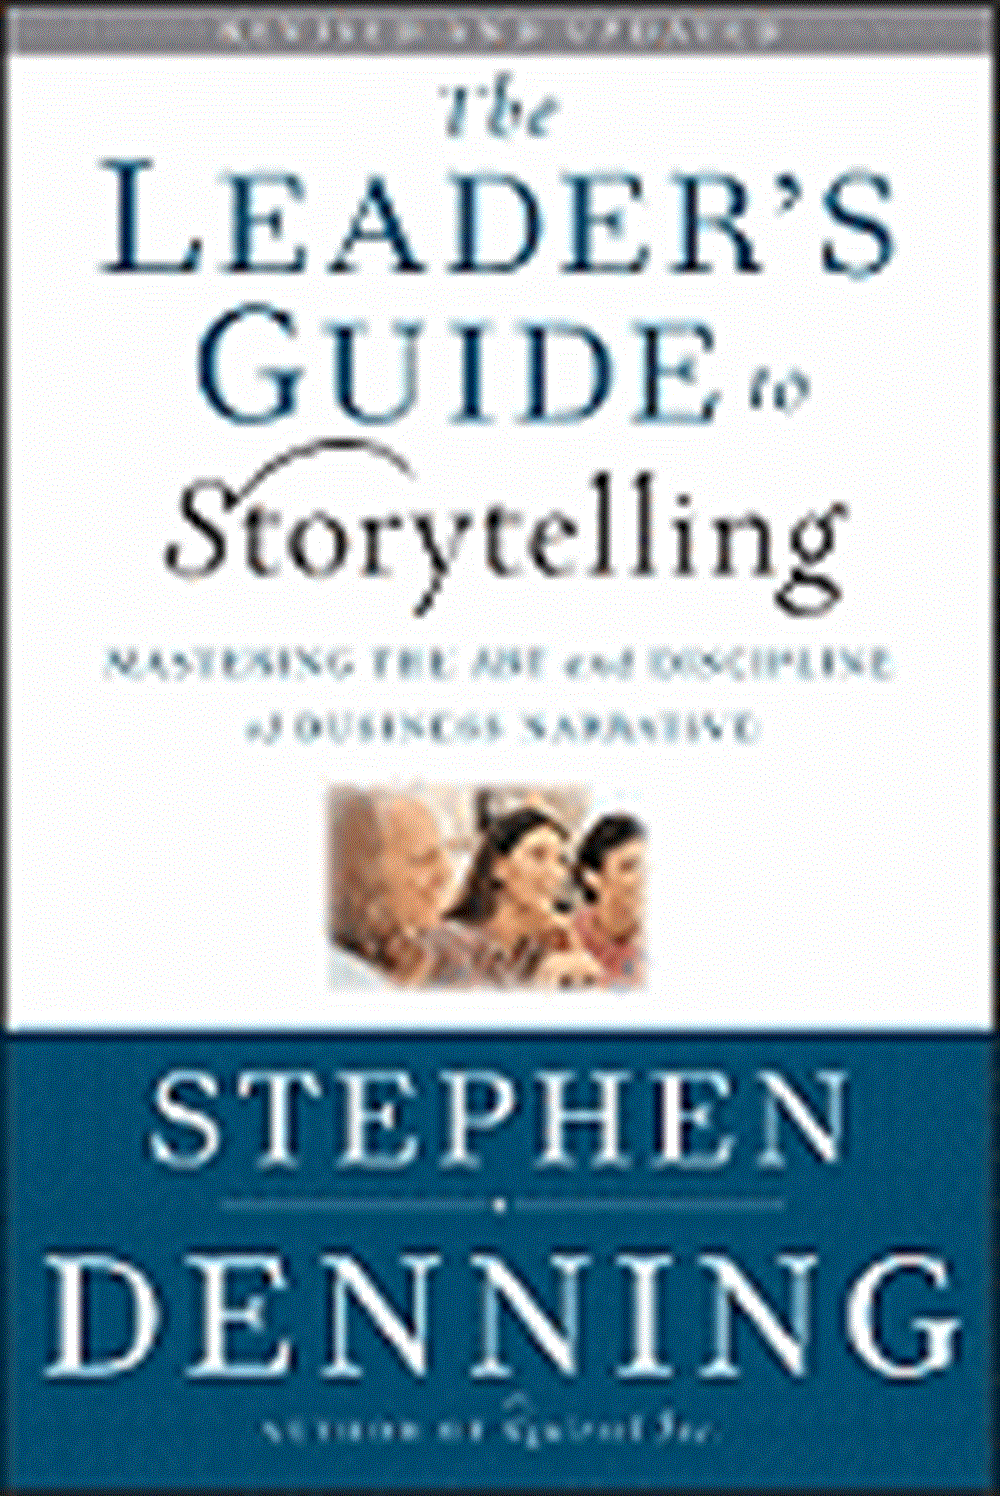 Leader's Guide to Storytelling: Mastering the Art and Discipline of Business Narrative (Revised and 